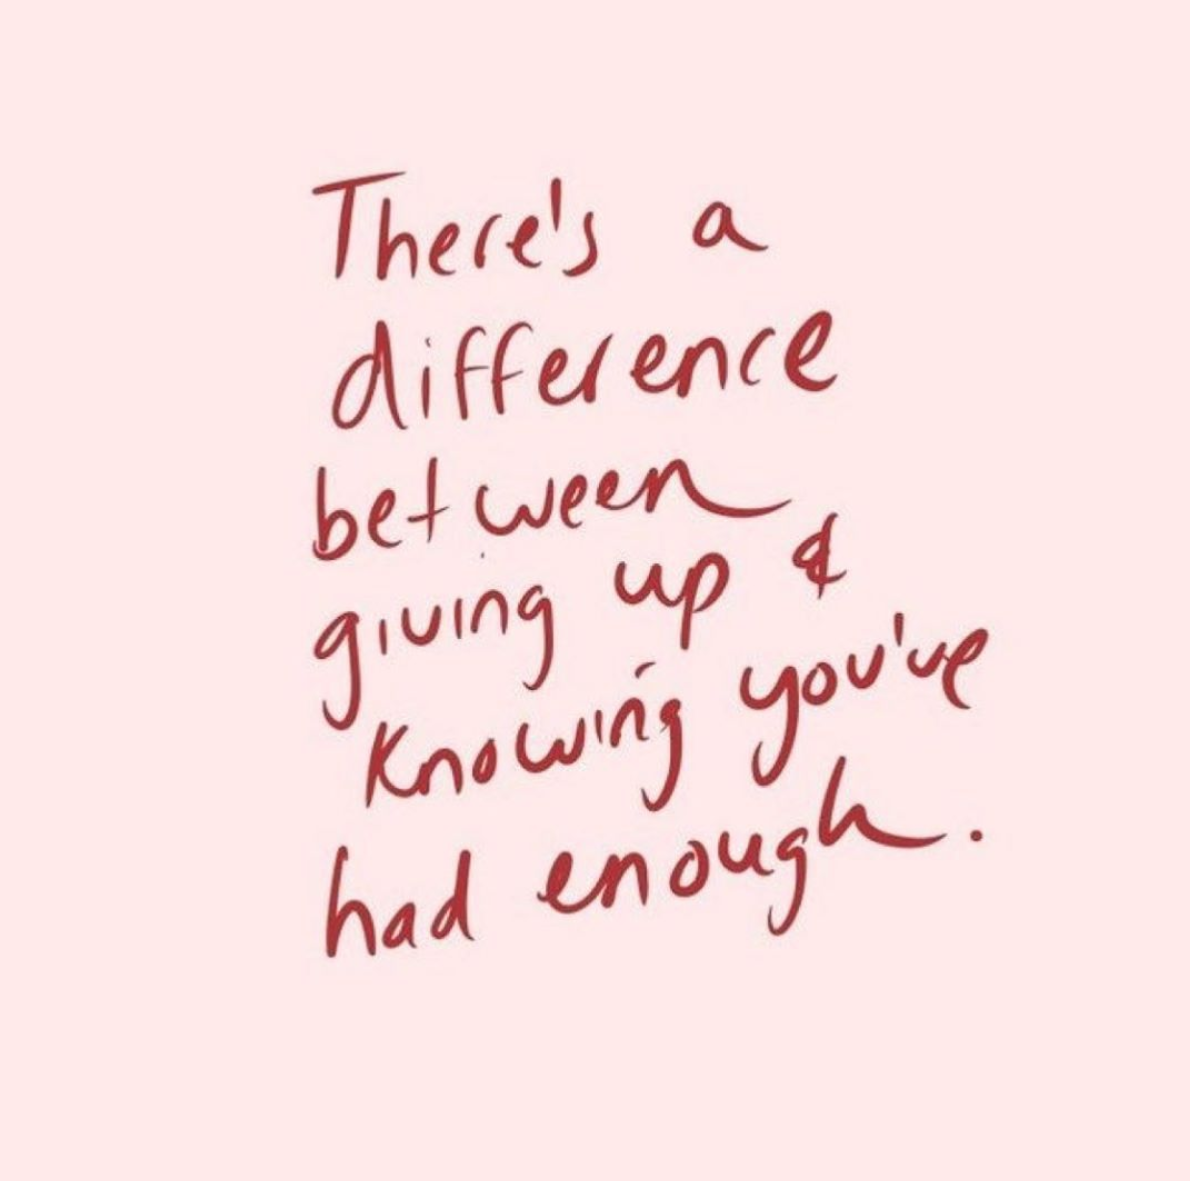 there's a difference between giving up and knowing when you've had enough